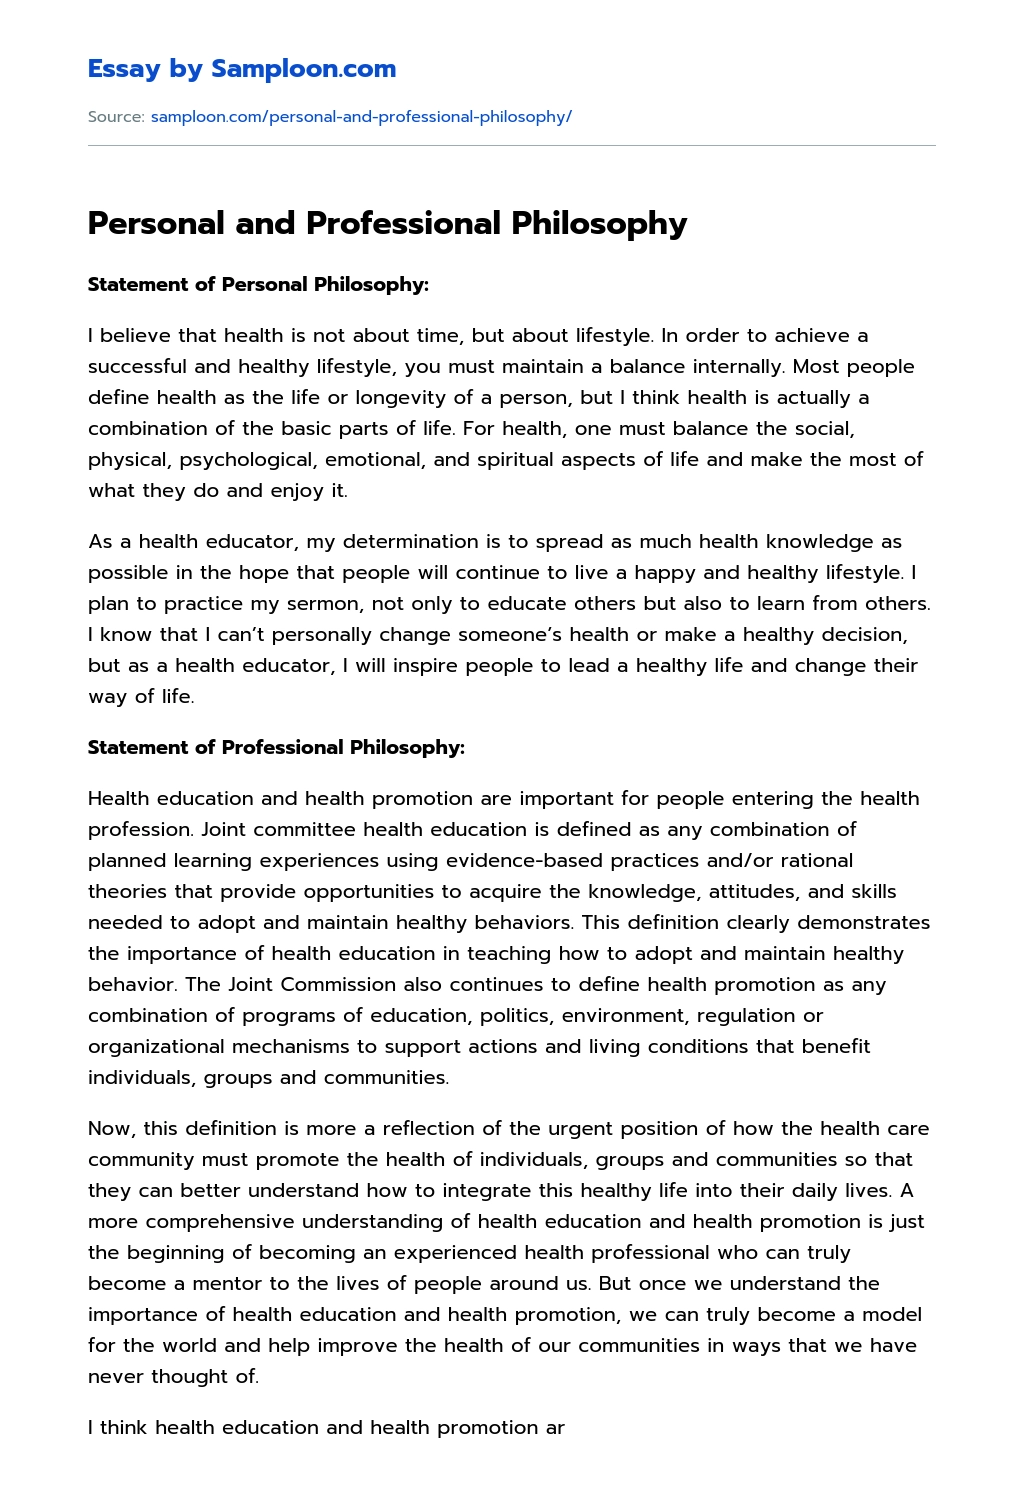 Personal and Professional Philosophy essay